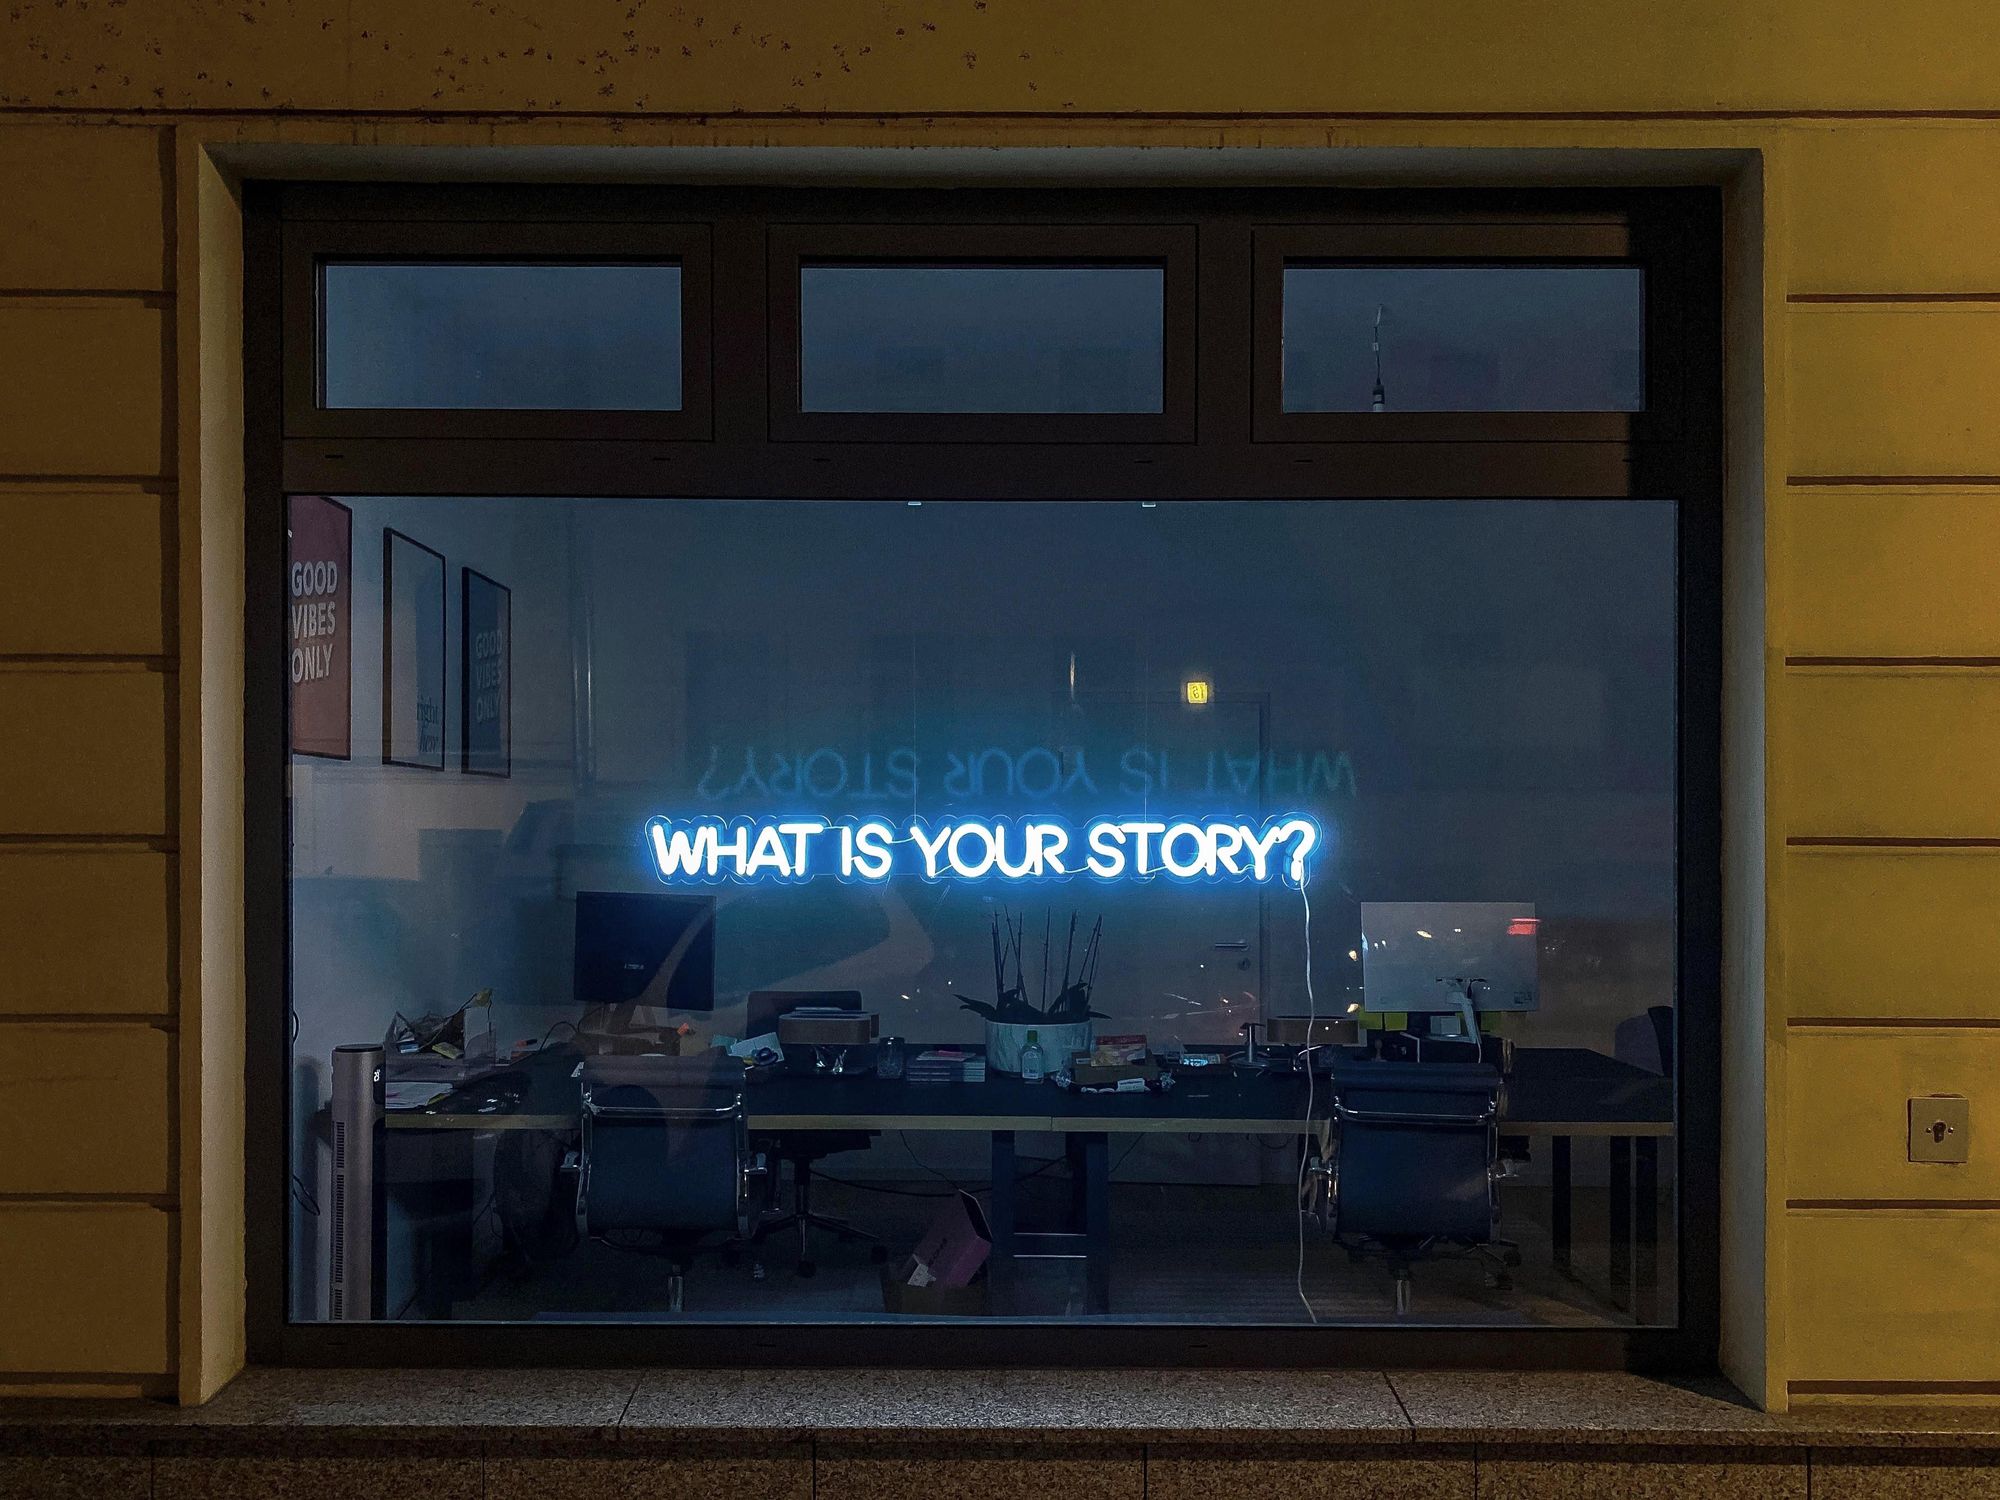 5 Ways Your Brand Can Connect Through Storytelling